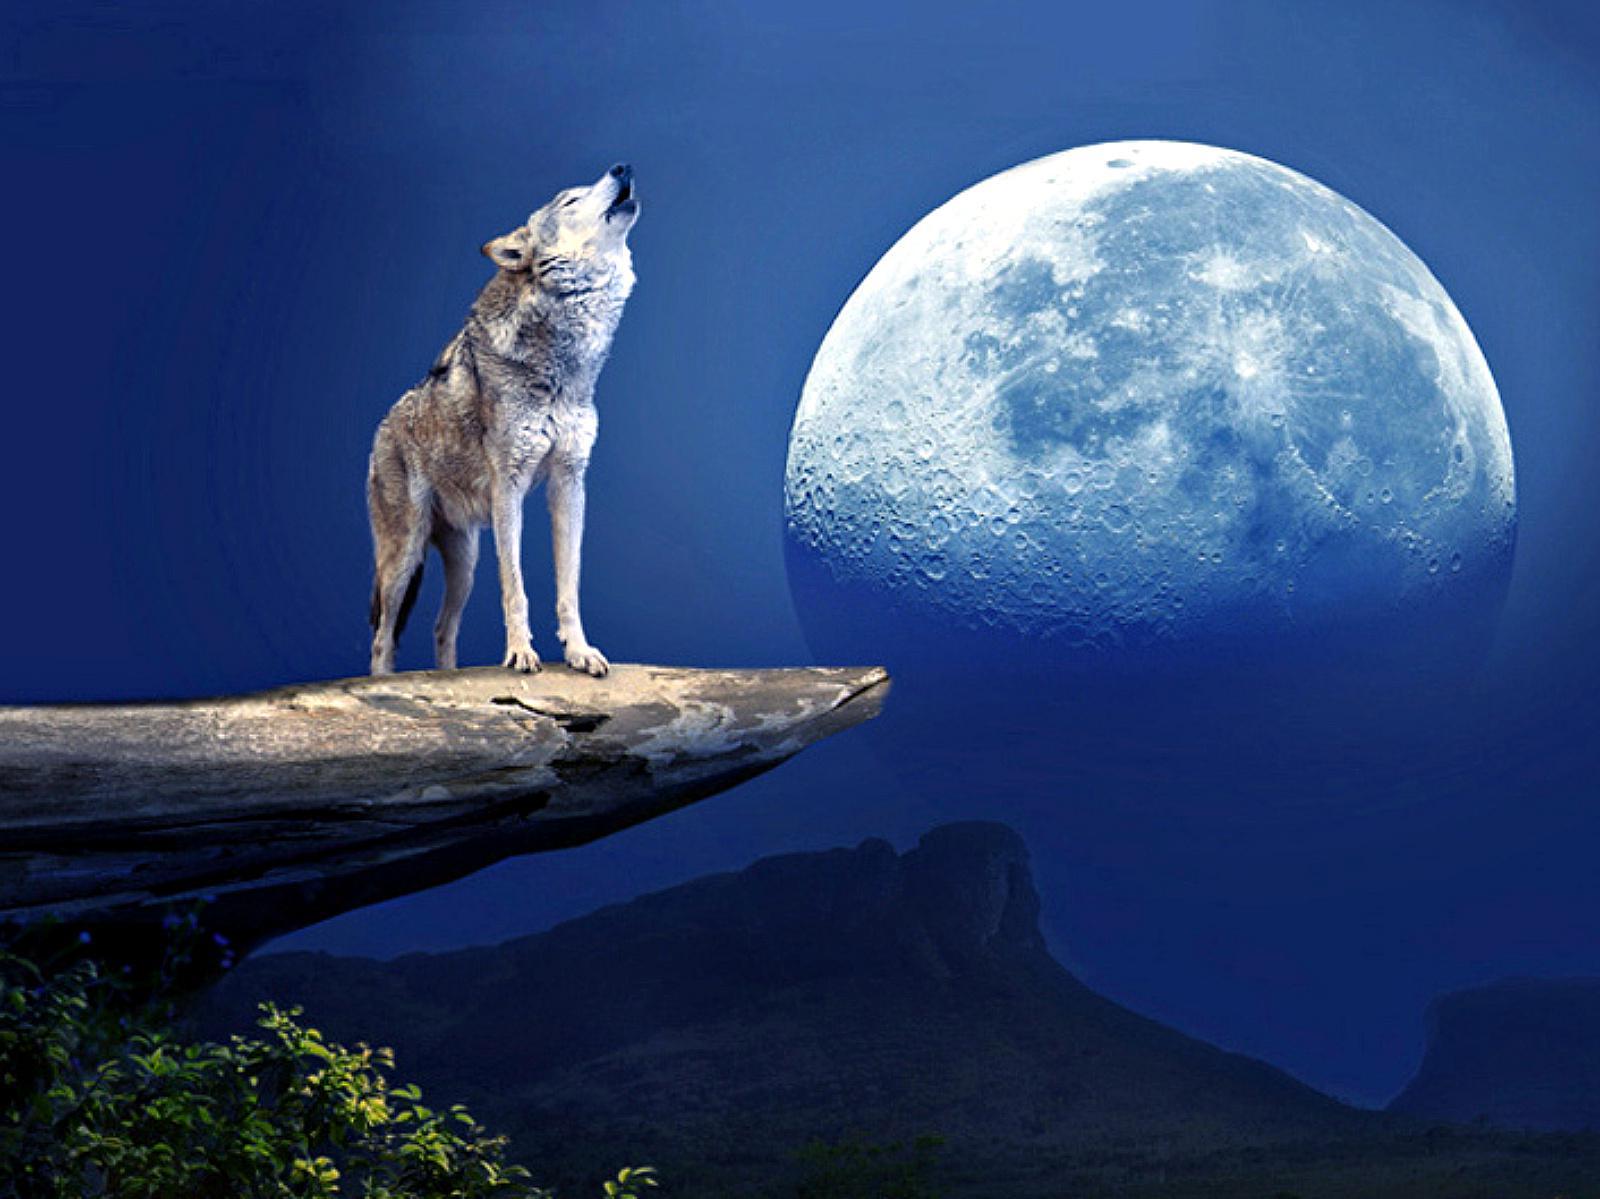 WOLF HOWLING AT THE MOON WALLPAPER - Wallpaper